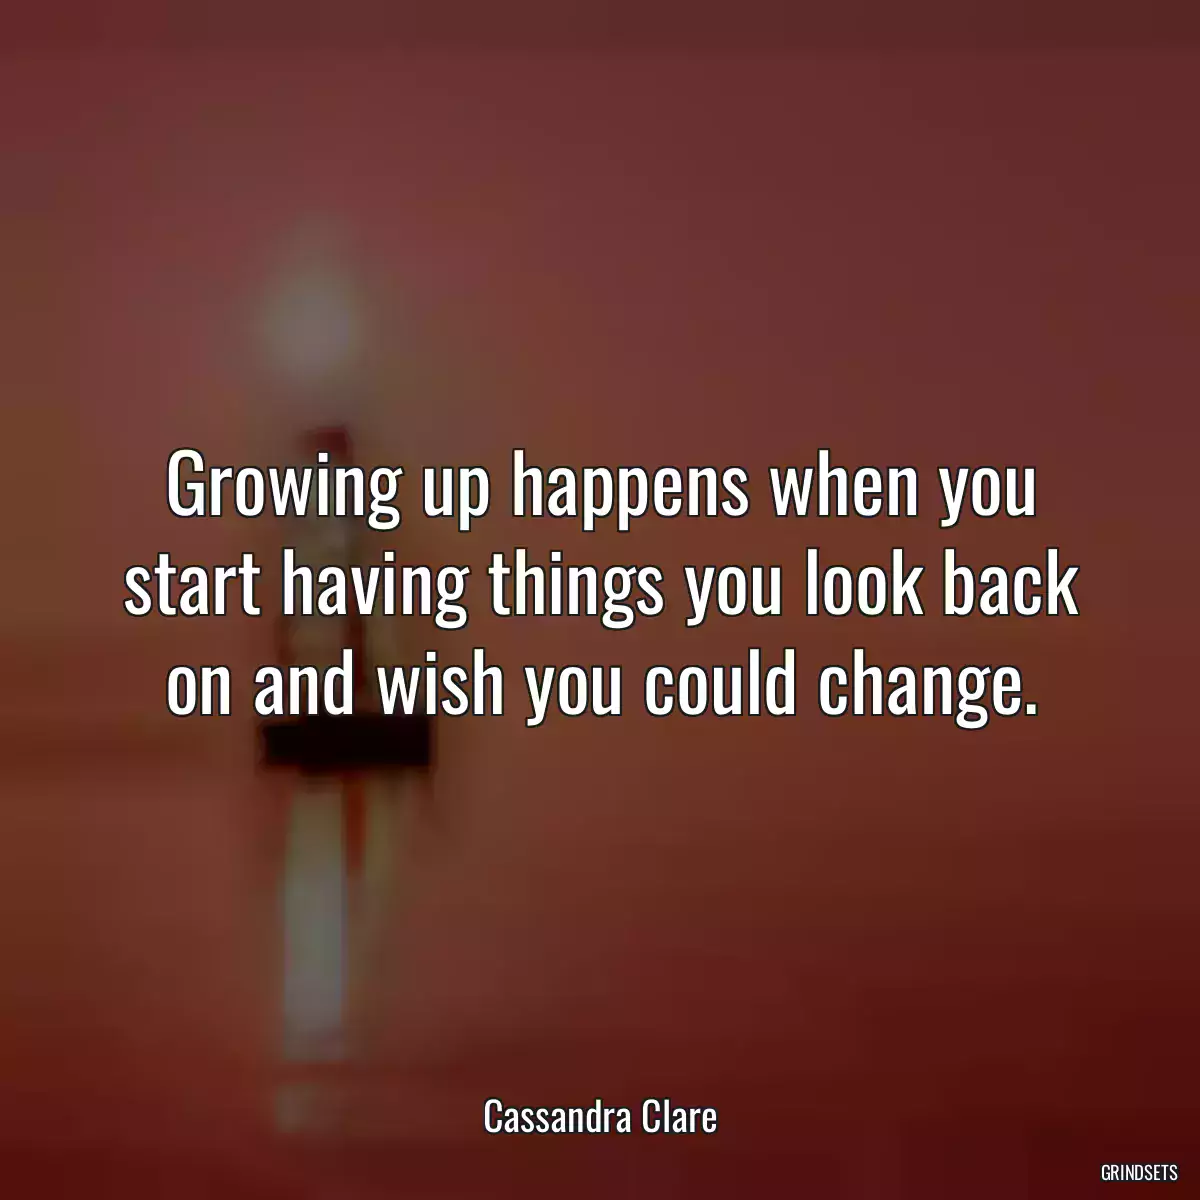 Growing up happens when you start having things you look back on and wish you could change.